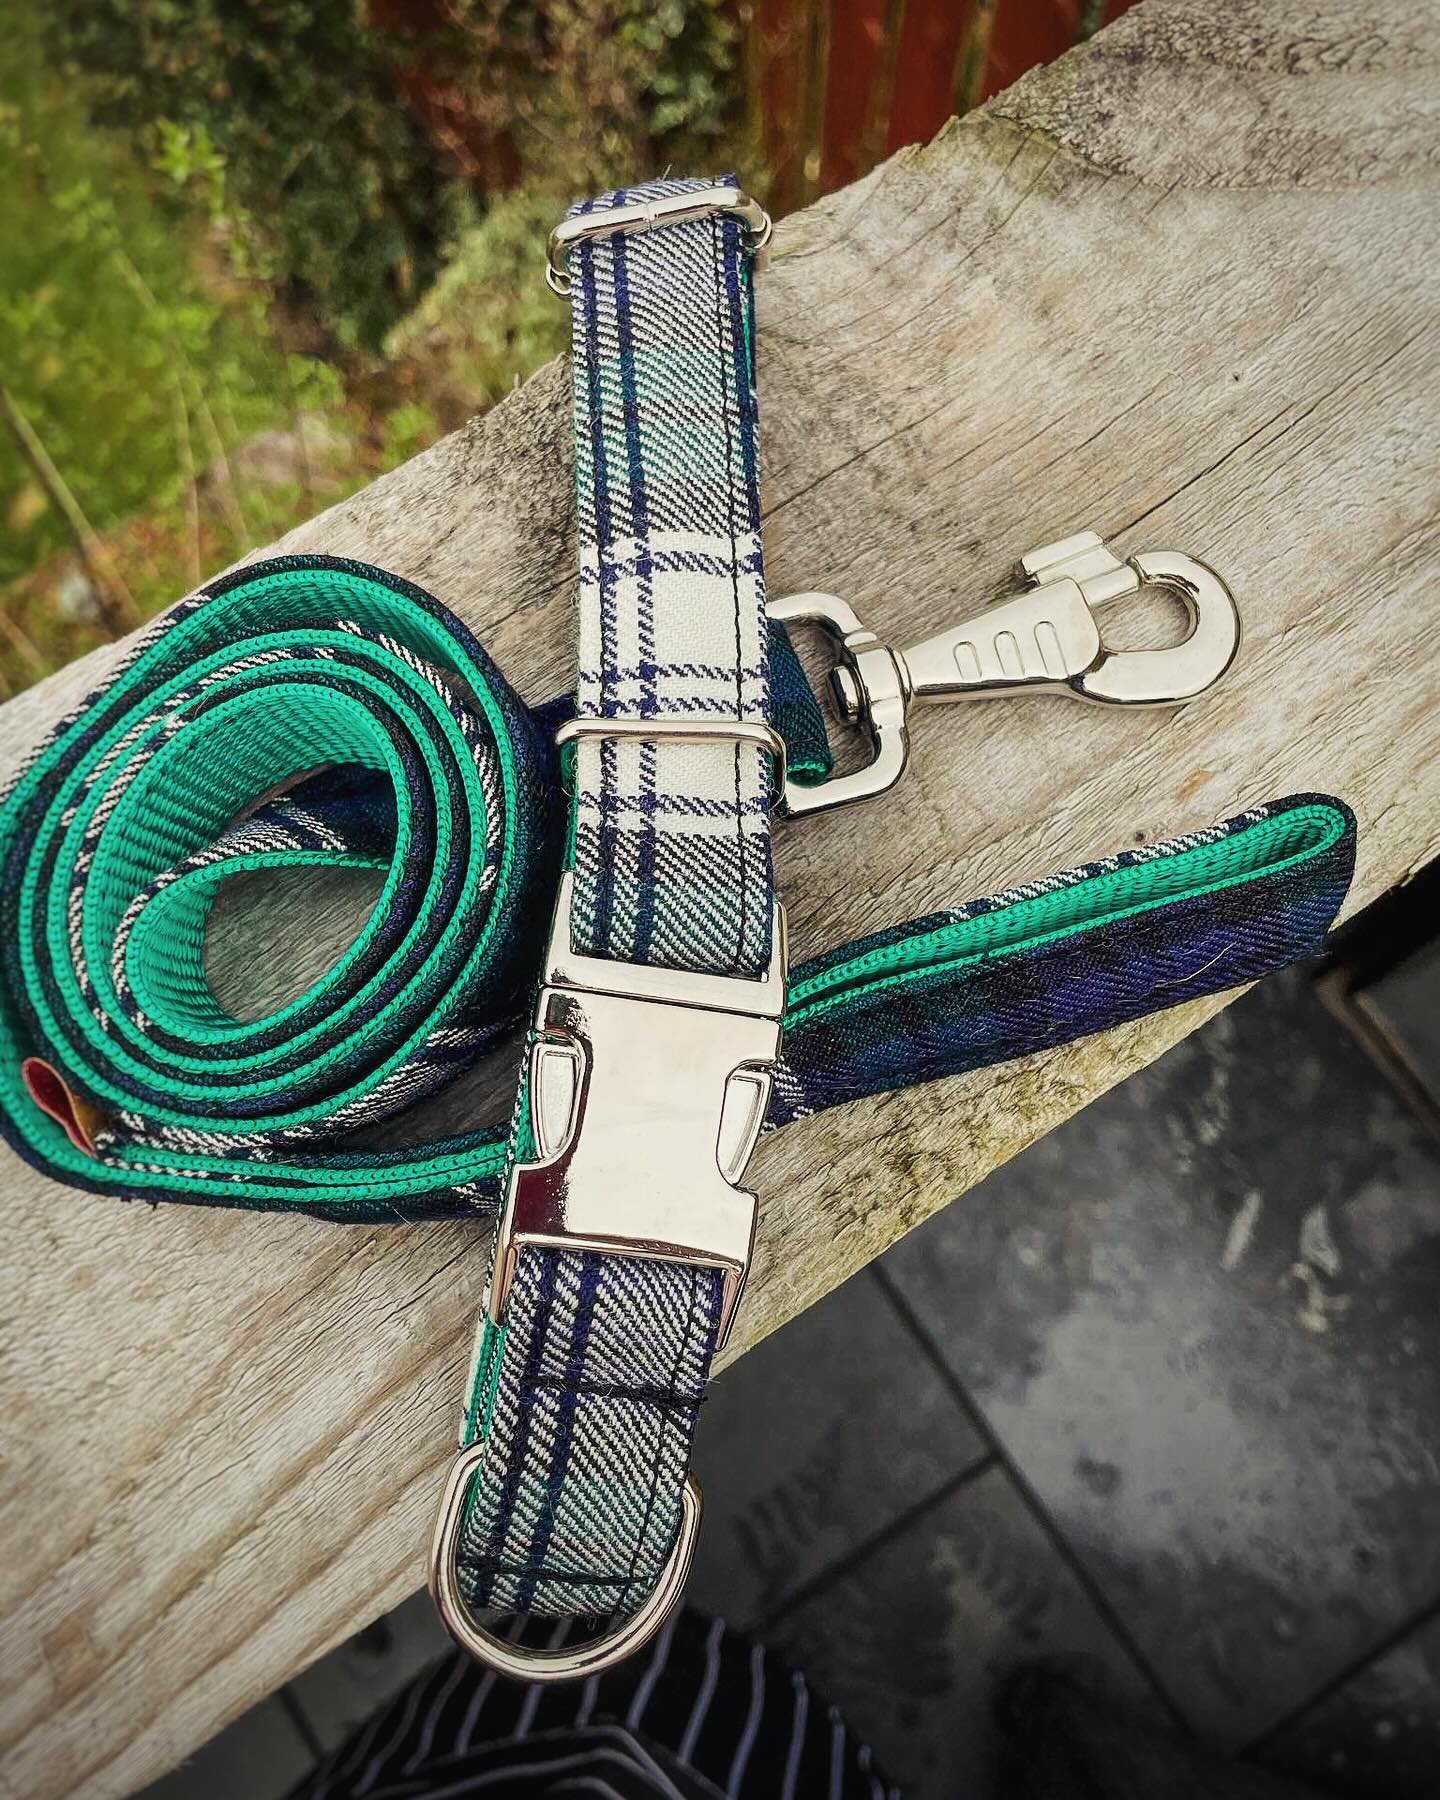 💍💒 A beautiful wedding set for a special couple!

This collar &amp; lead is a classic Blackwatch Dress Tartan, perfect for the big day - we have hundreds of Tartans, Pure Wool and Harris Tweed to choose from no matter what your colour scheme is or 